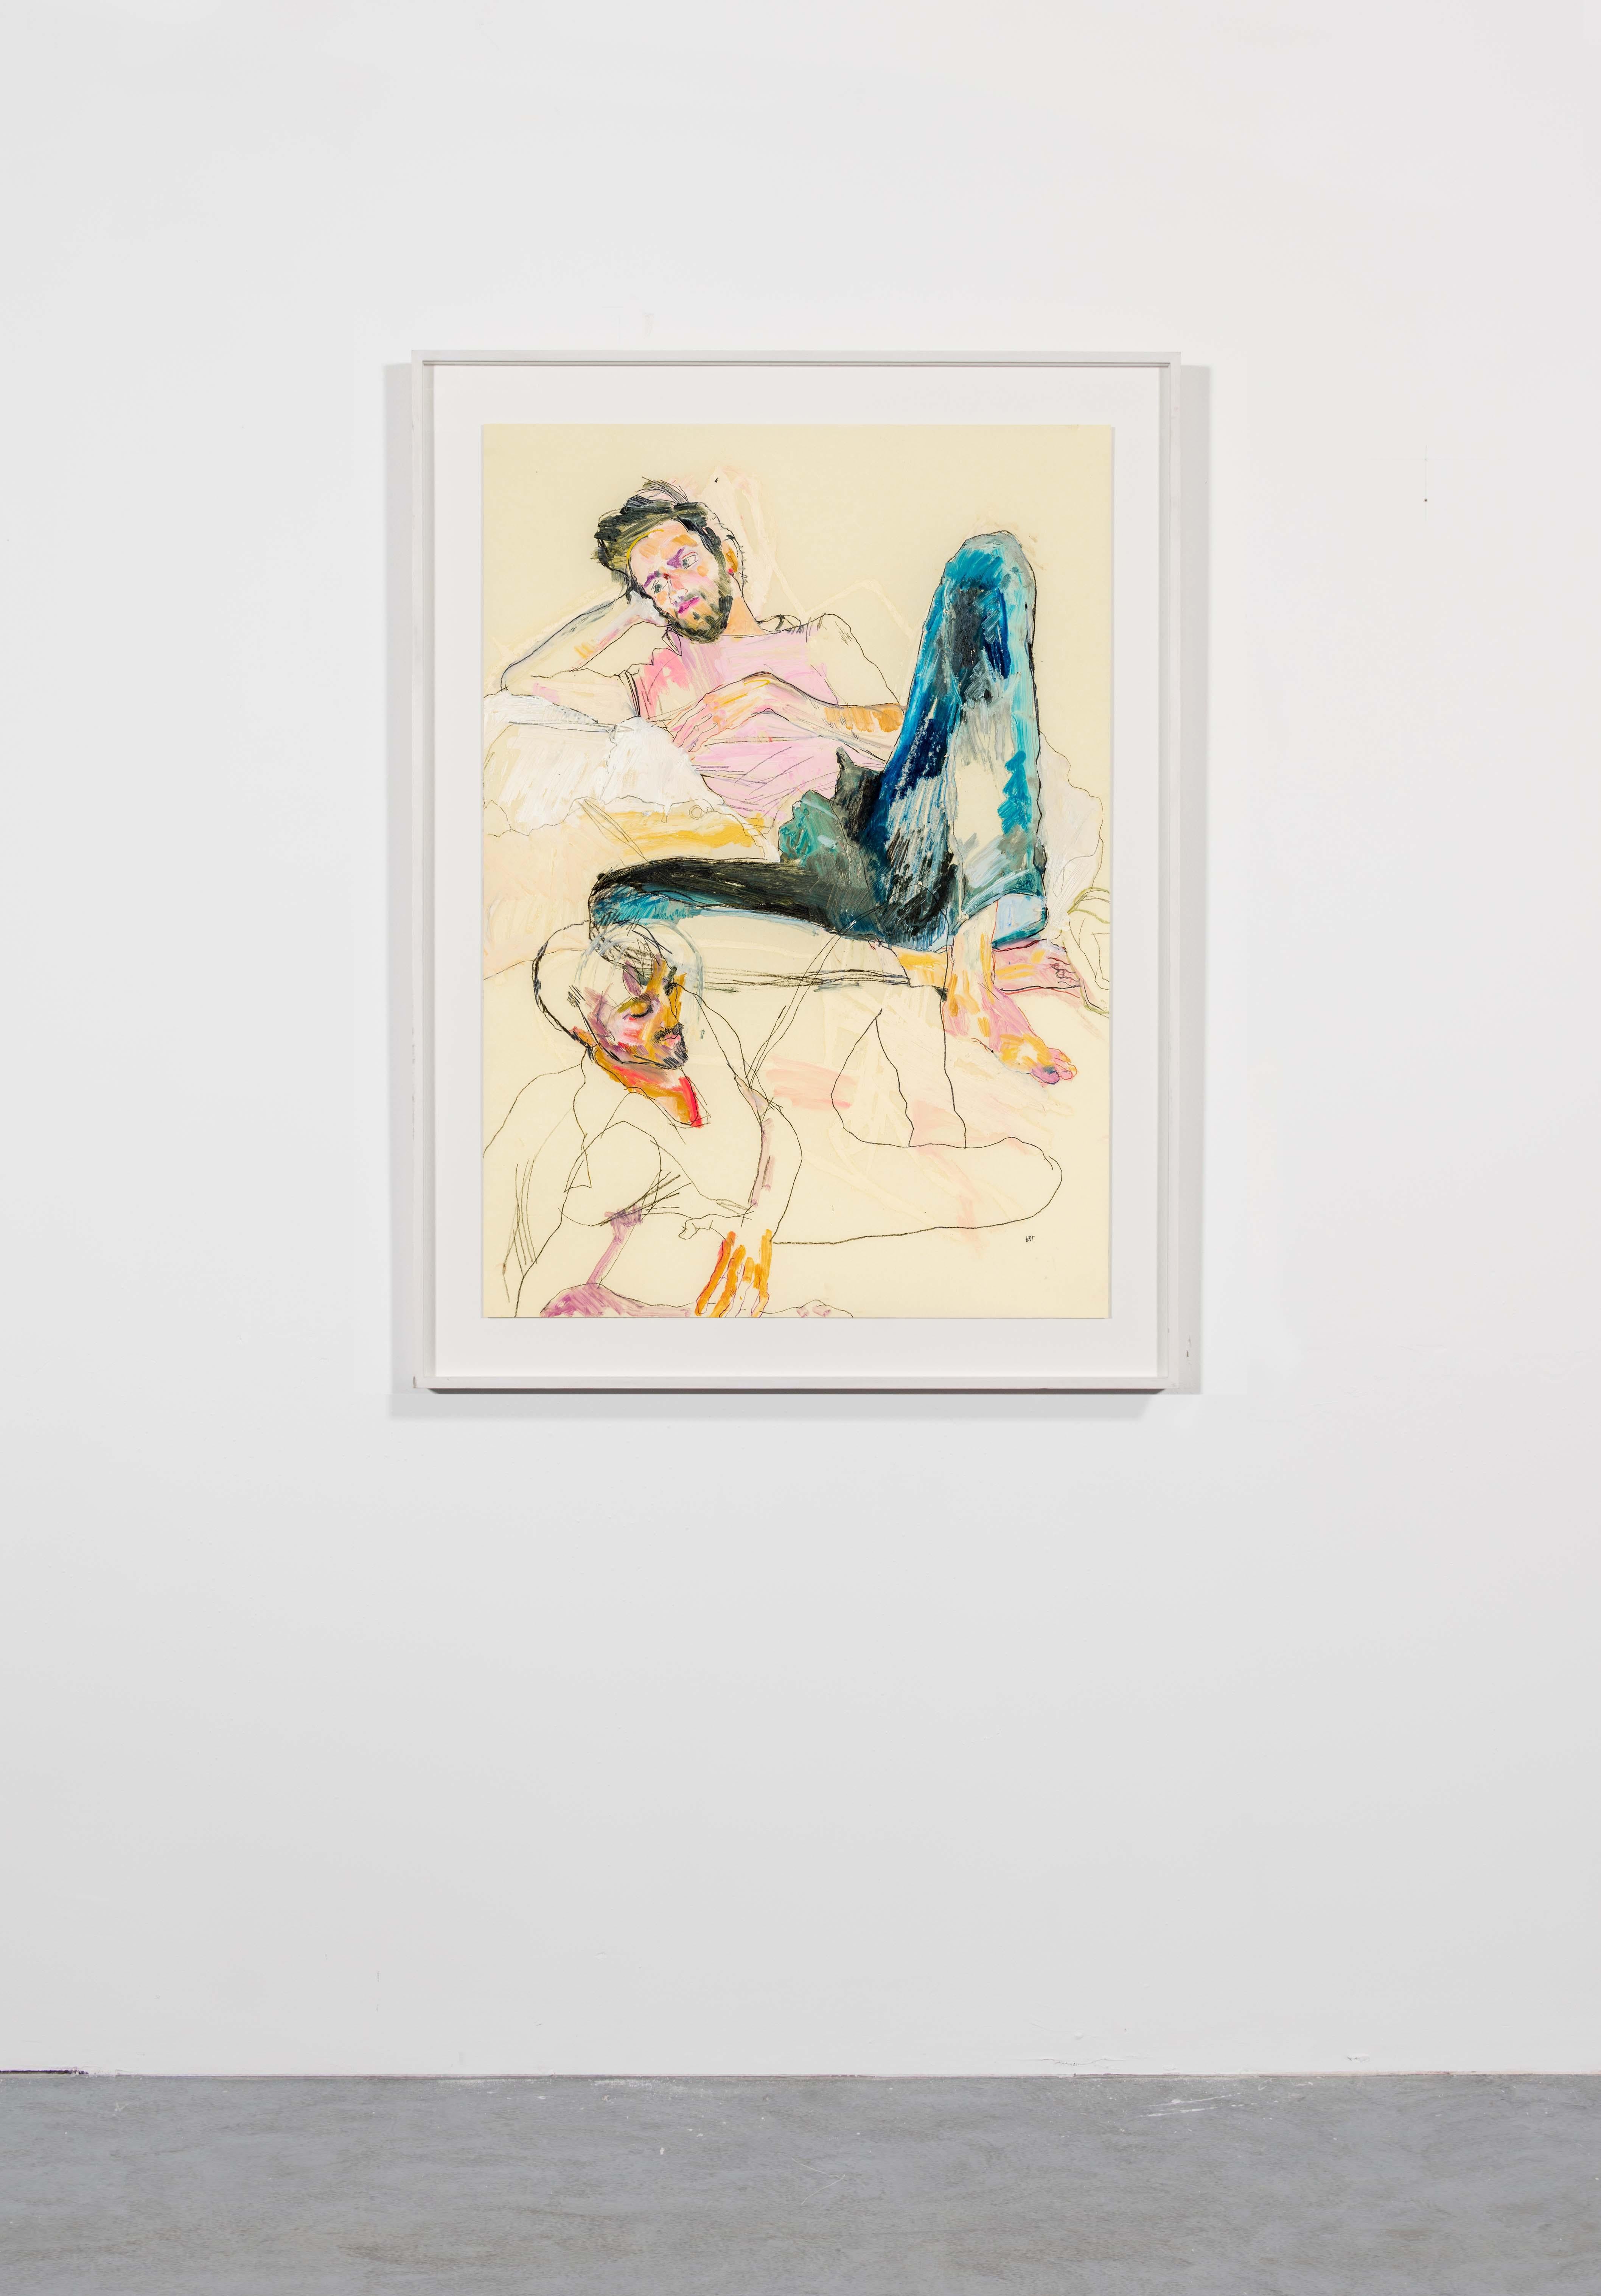 Giorgio (Two figures, pink & blue), Mixed media on Pergameneta parchment - Contemporary Art by Howard Tangye